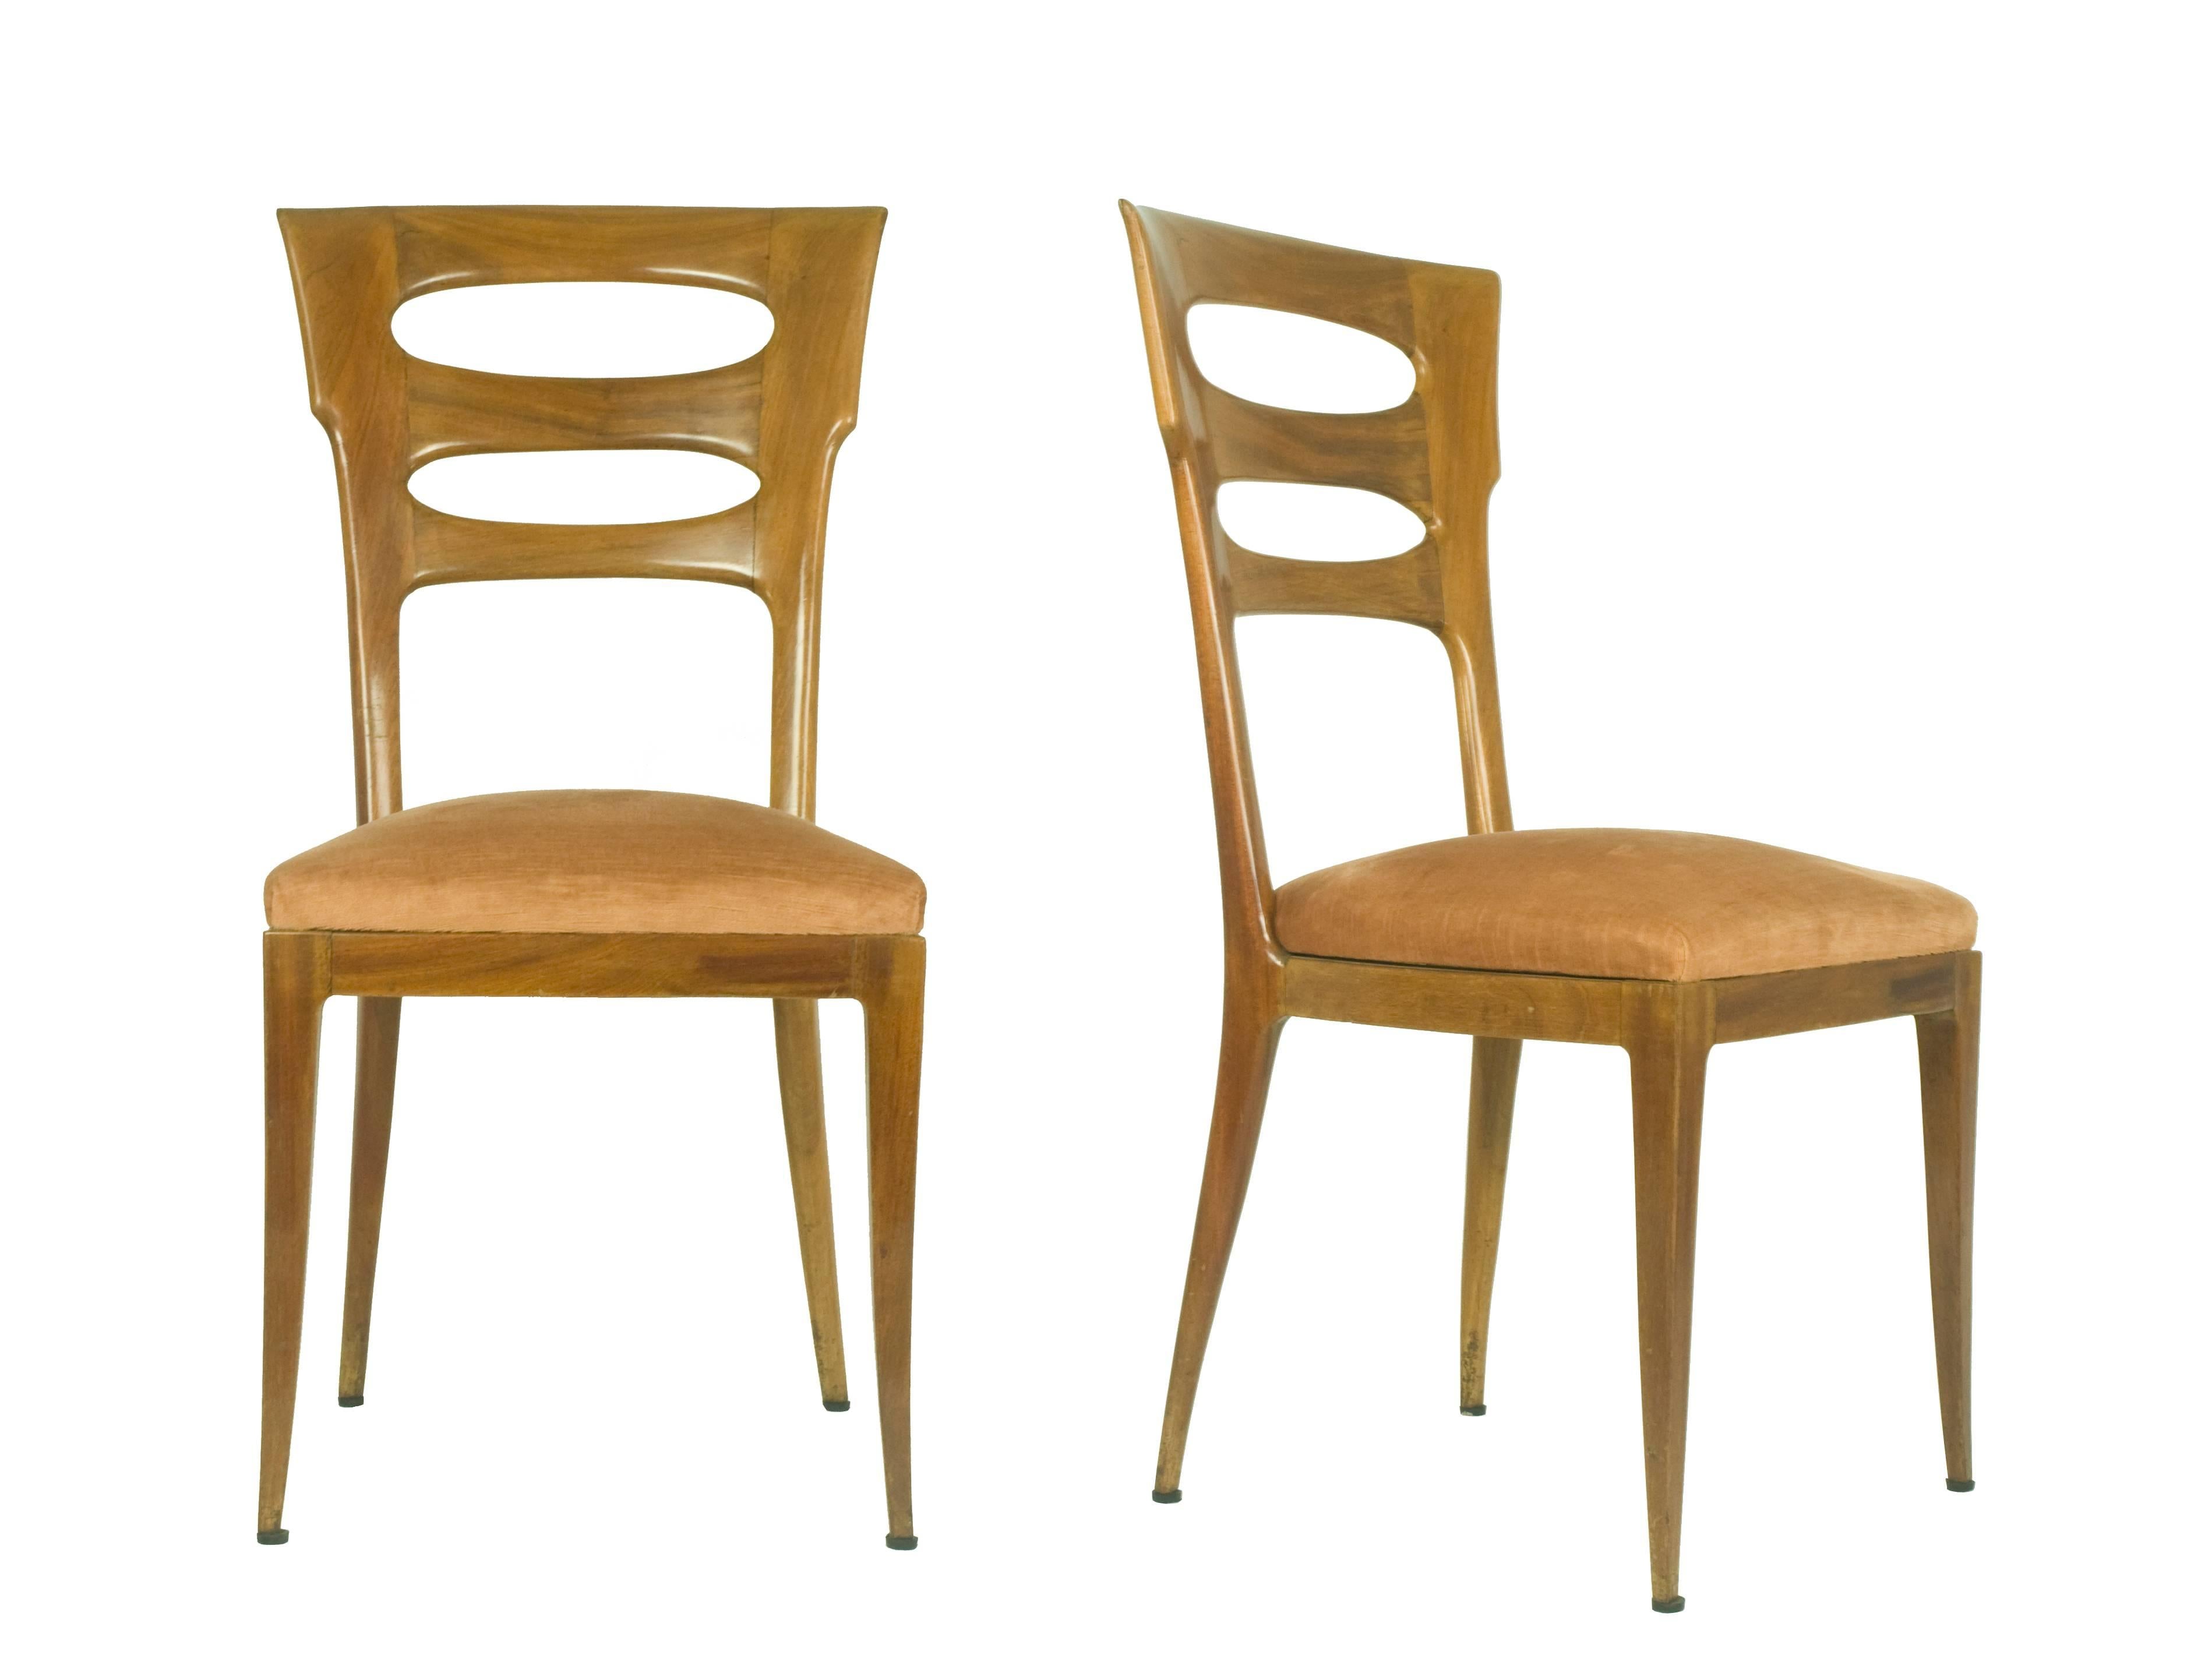 The design of this set of four sculptural chairs is attributed to Guglielmo Ulrich. The chairs were produced in the 1940s and retain their original old pink velvet upholstery. Very good condition: wear consistent with age and use. Partially restored.